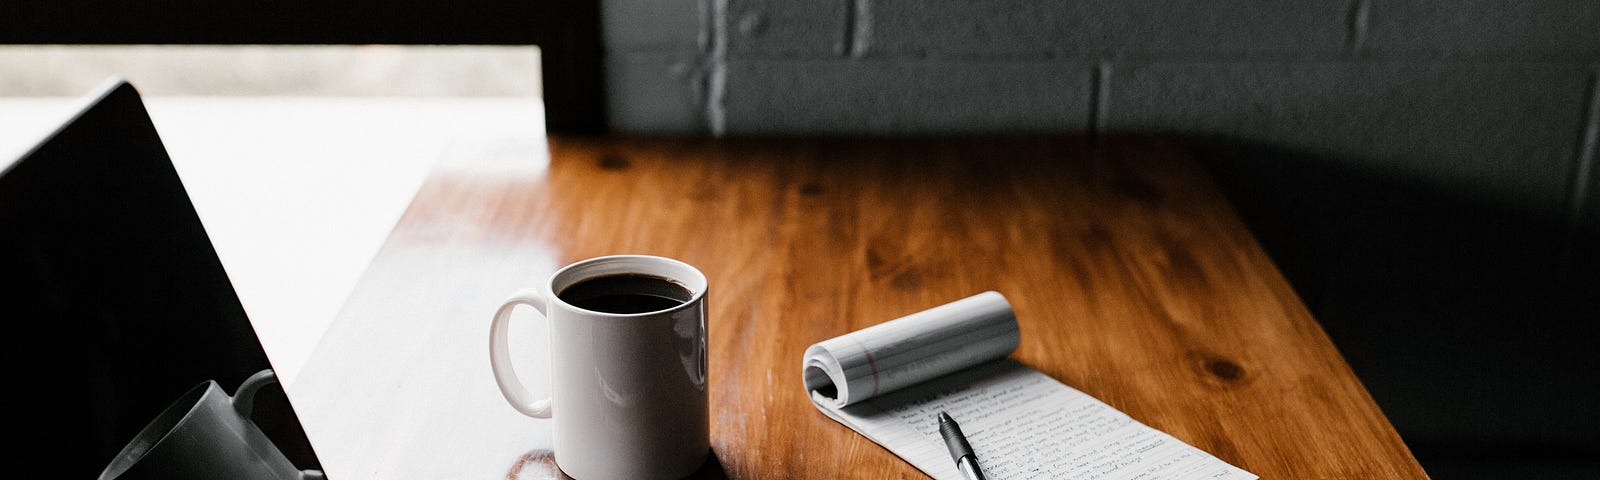 Photo by Andrew Neel on Unsplash — Computer, mug, phone and notepad at desk